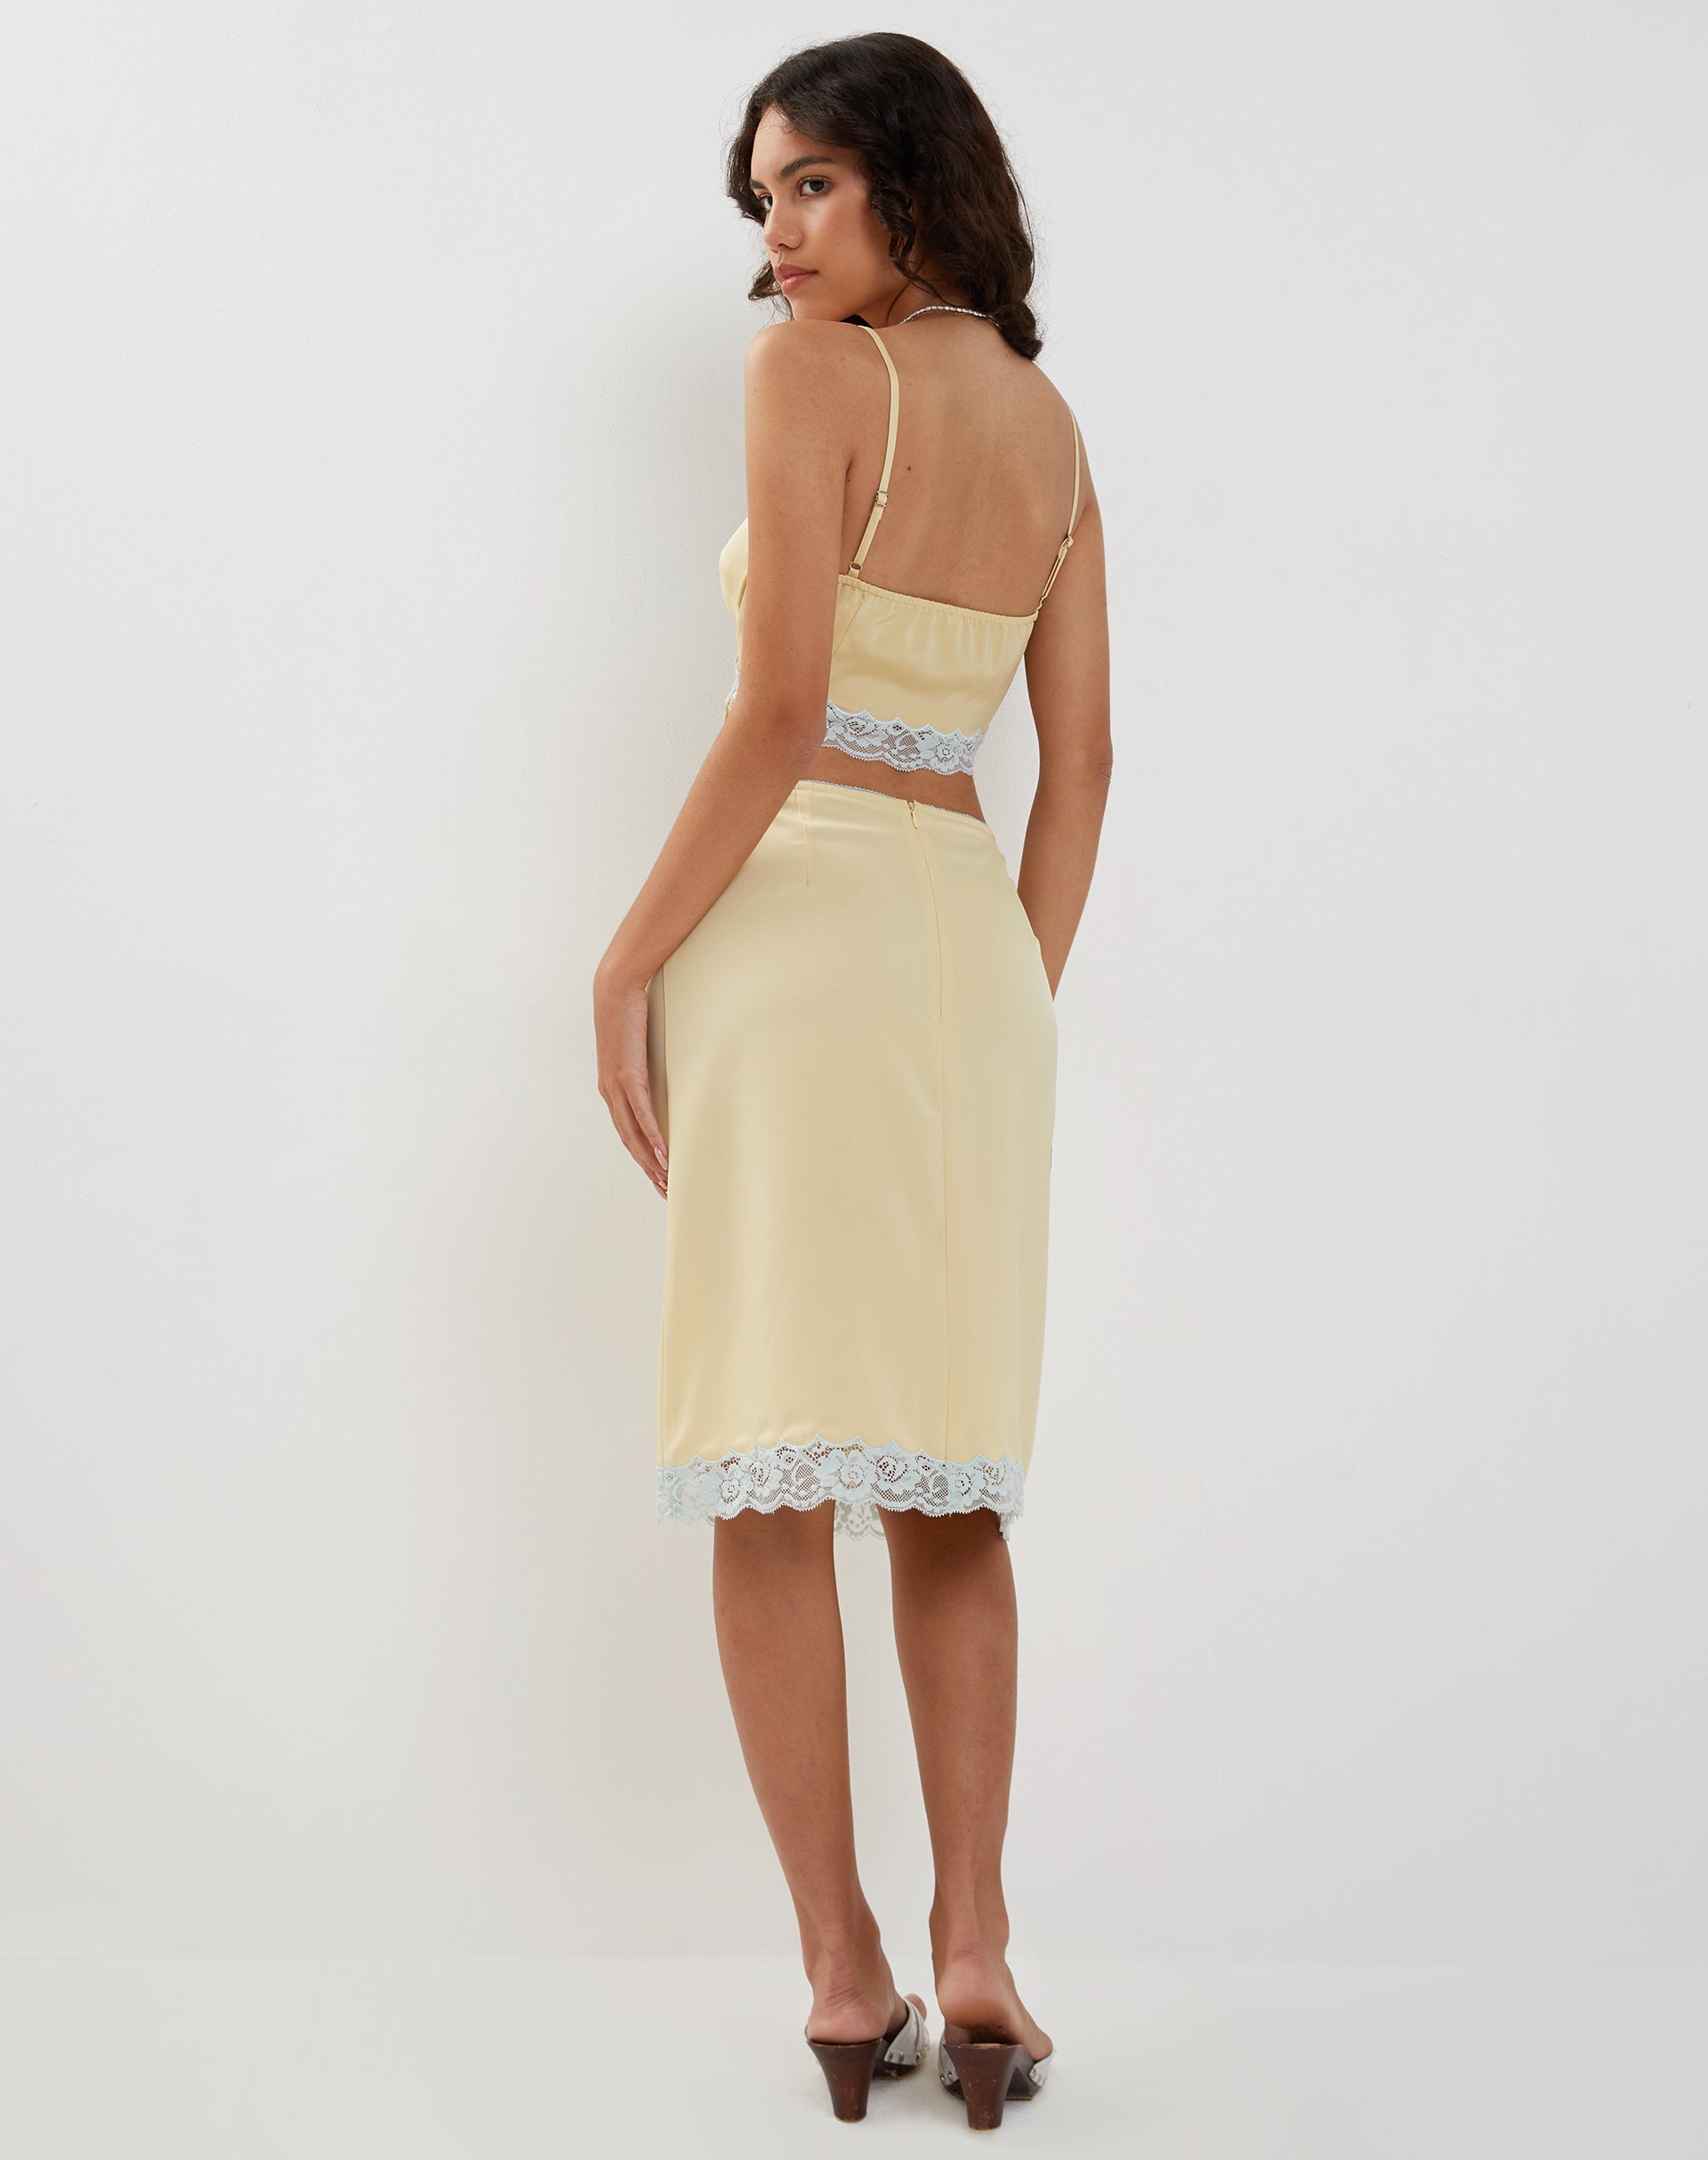 Image of Resika Low Rise Midi Skirt in Satin Pale Yellow